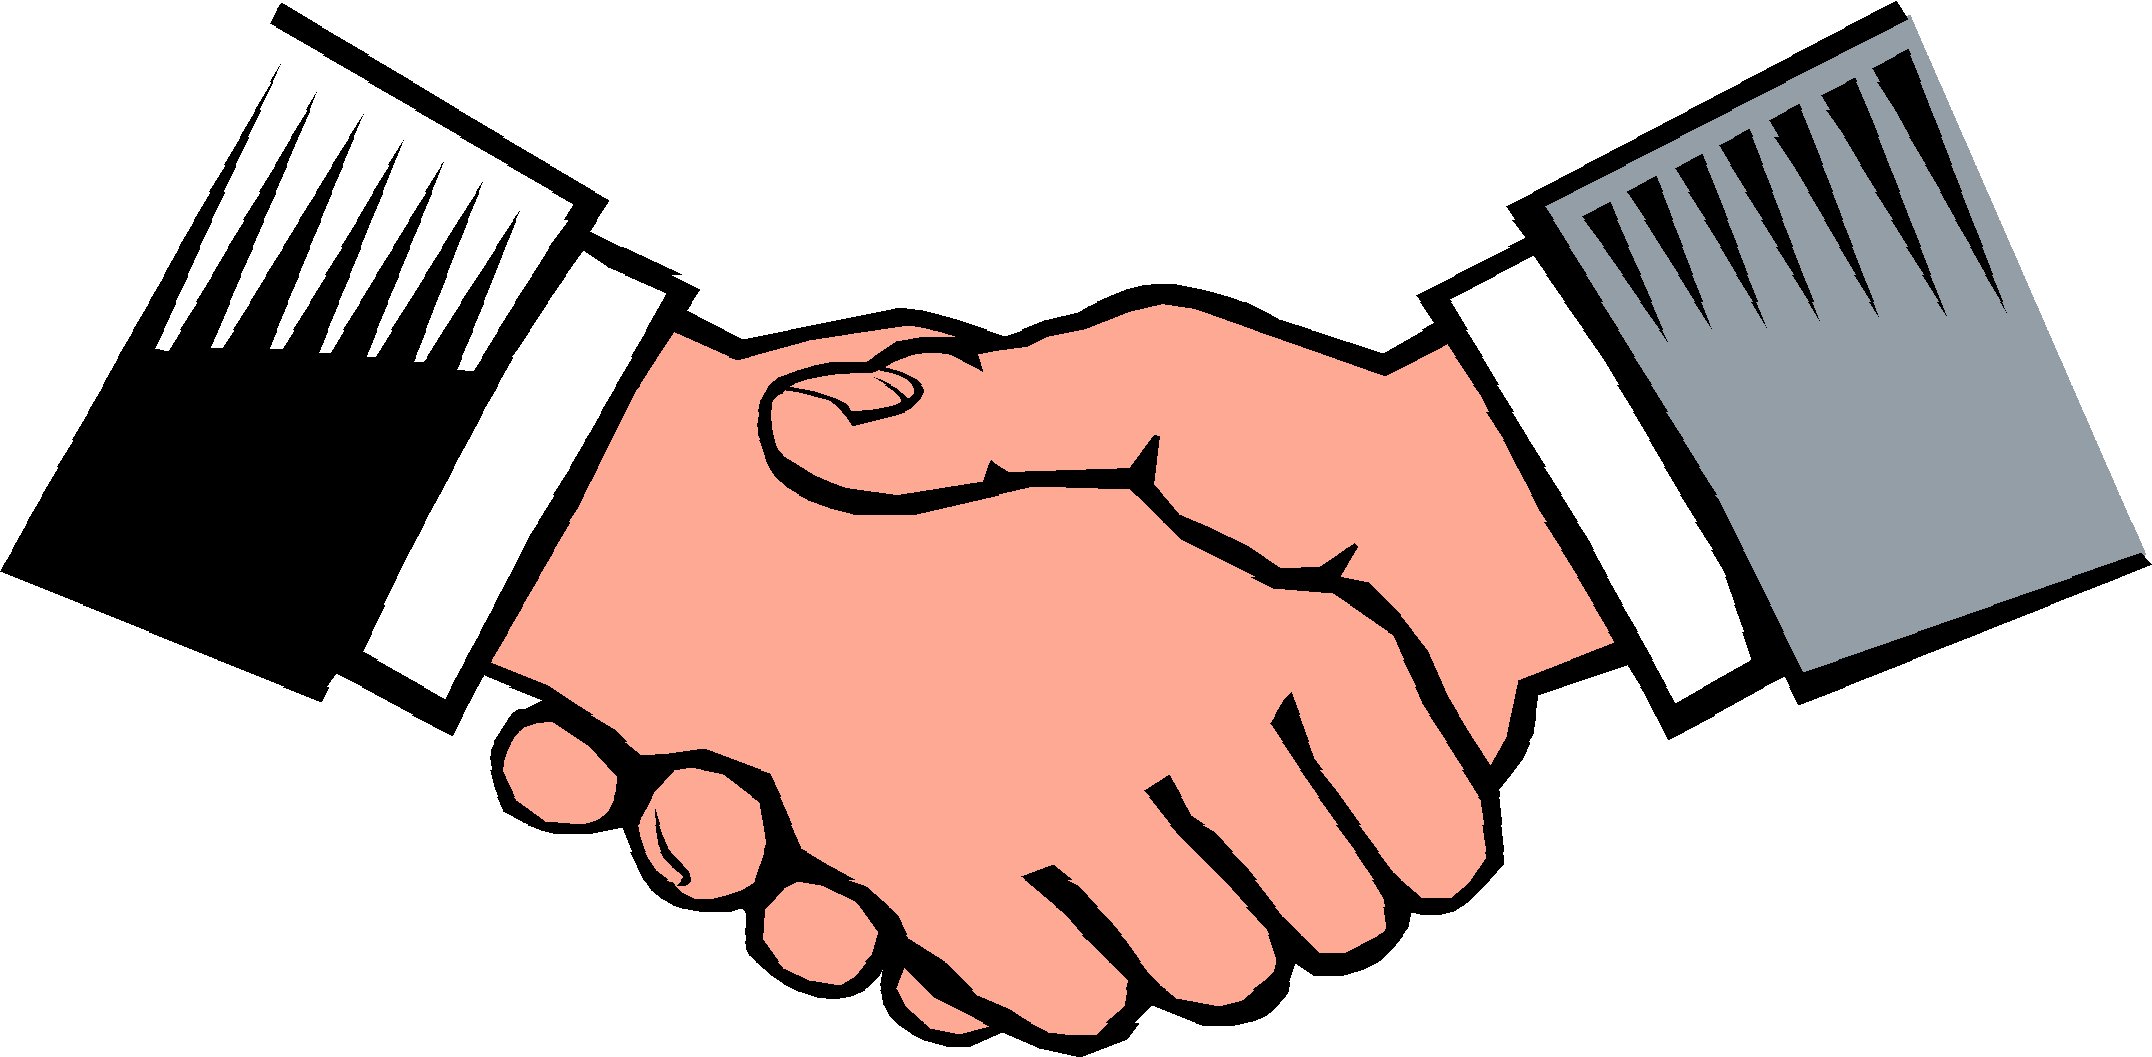 Shaking Hands Gif - ClipArt Best